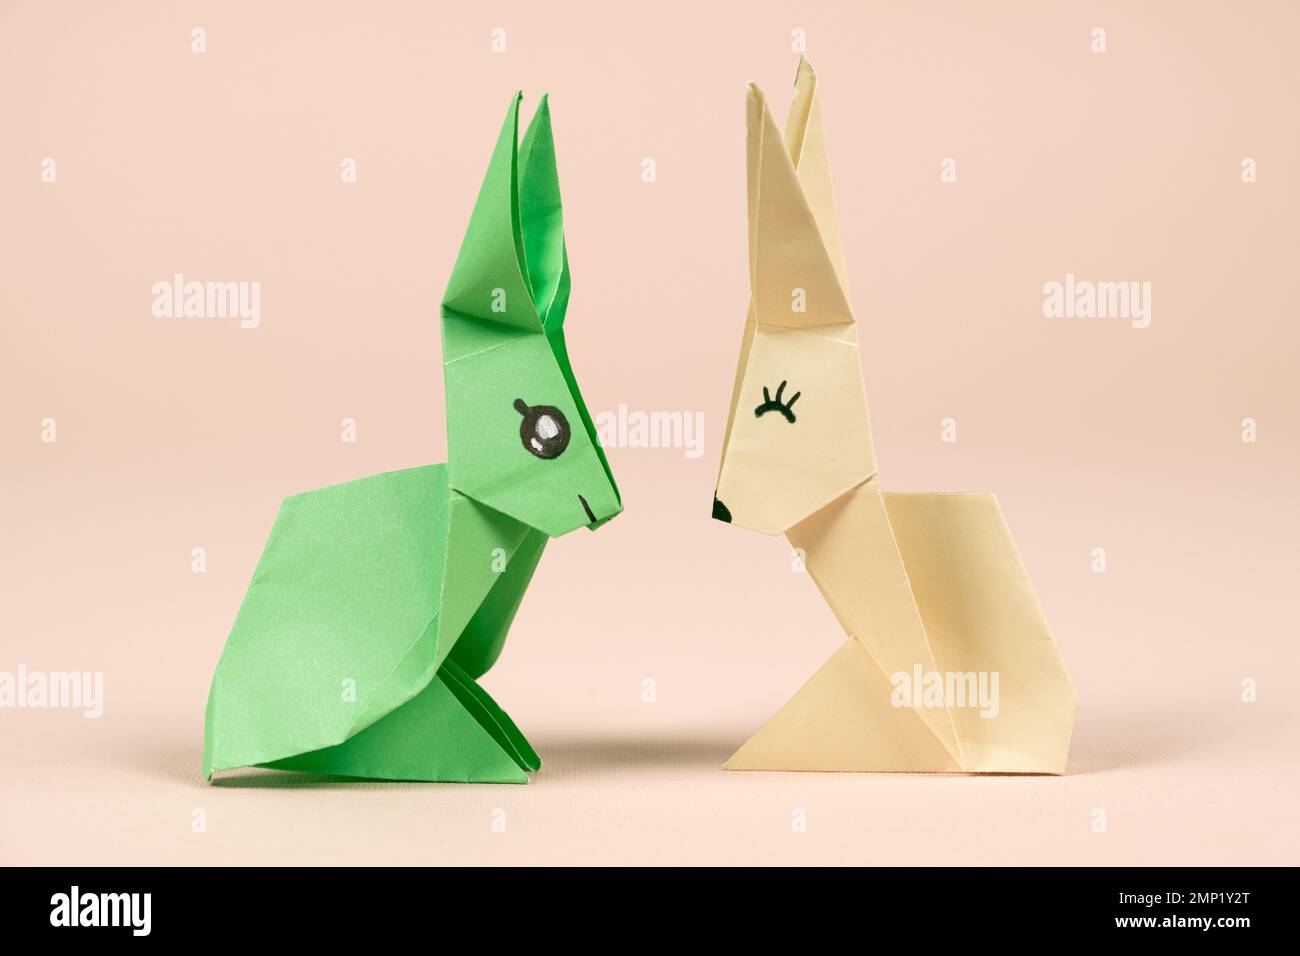 A green and yellow origami rabbits on a beige background. Crafts for Easter, fold from paper, do it yourself Stock Photo